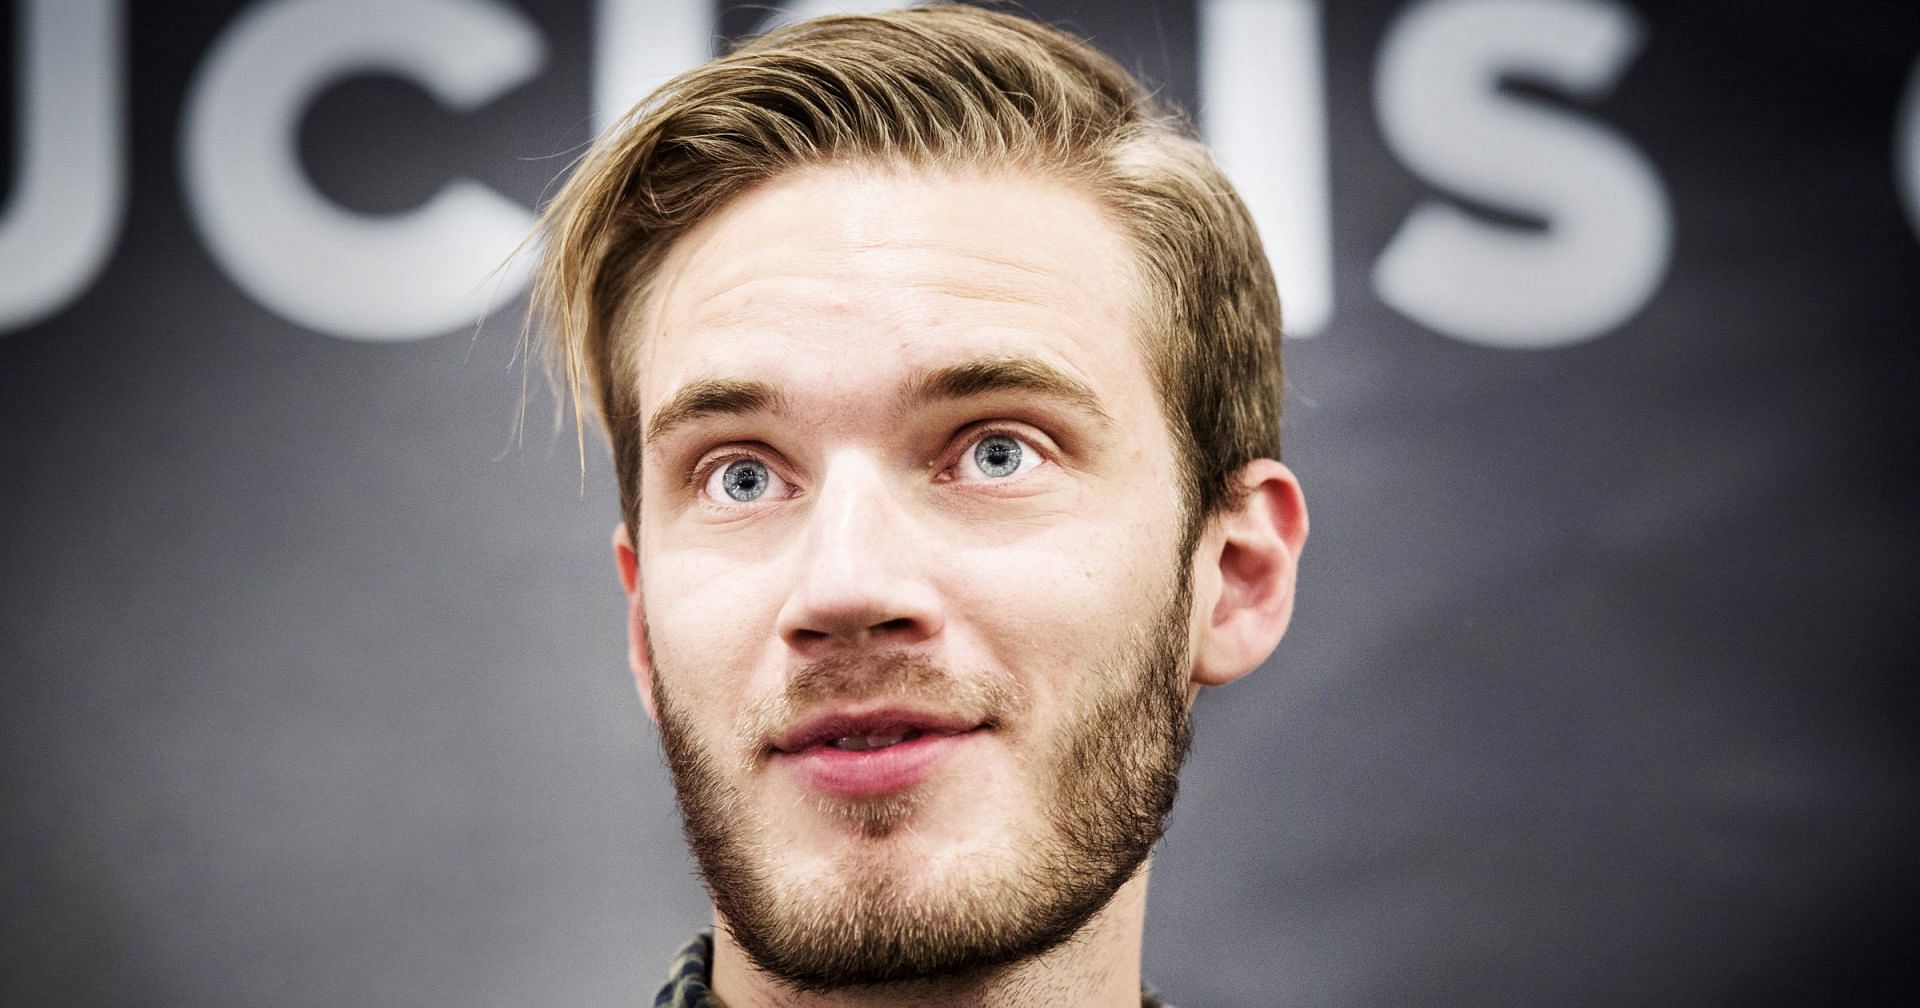 PewDiePie expresses his frustration with YouTube and the constant copyright problems the platform has (Image via Google)